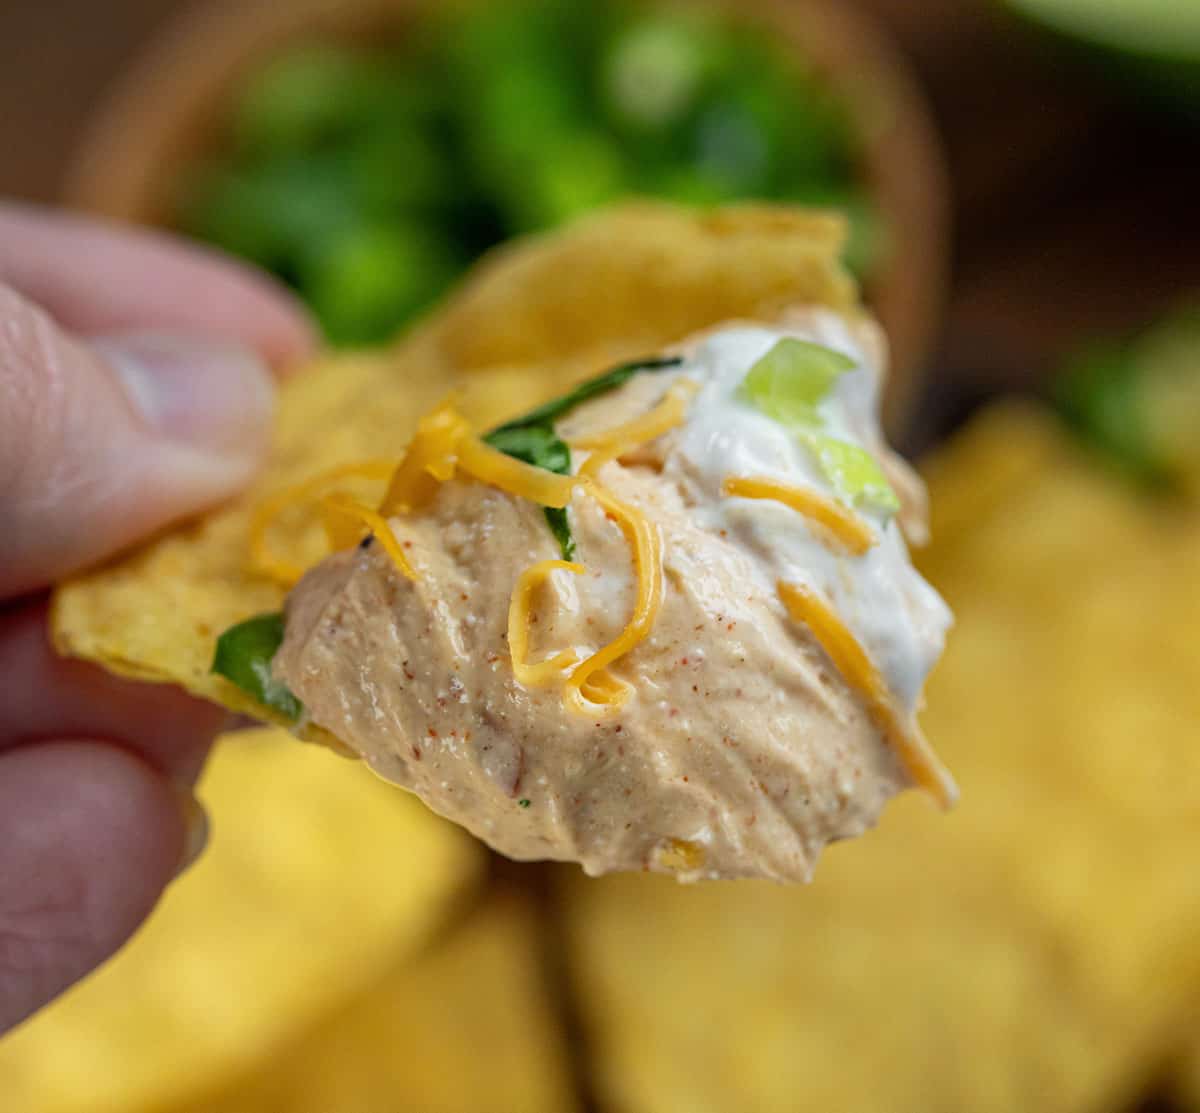 Hand holding a chip with Taco Dip on it.